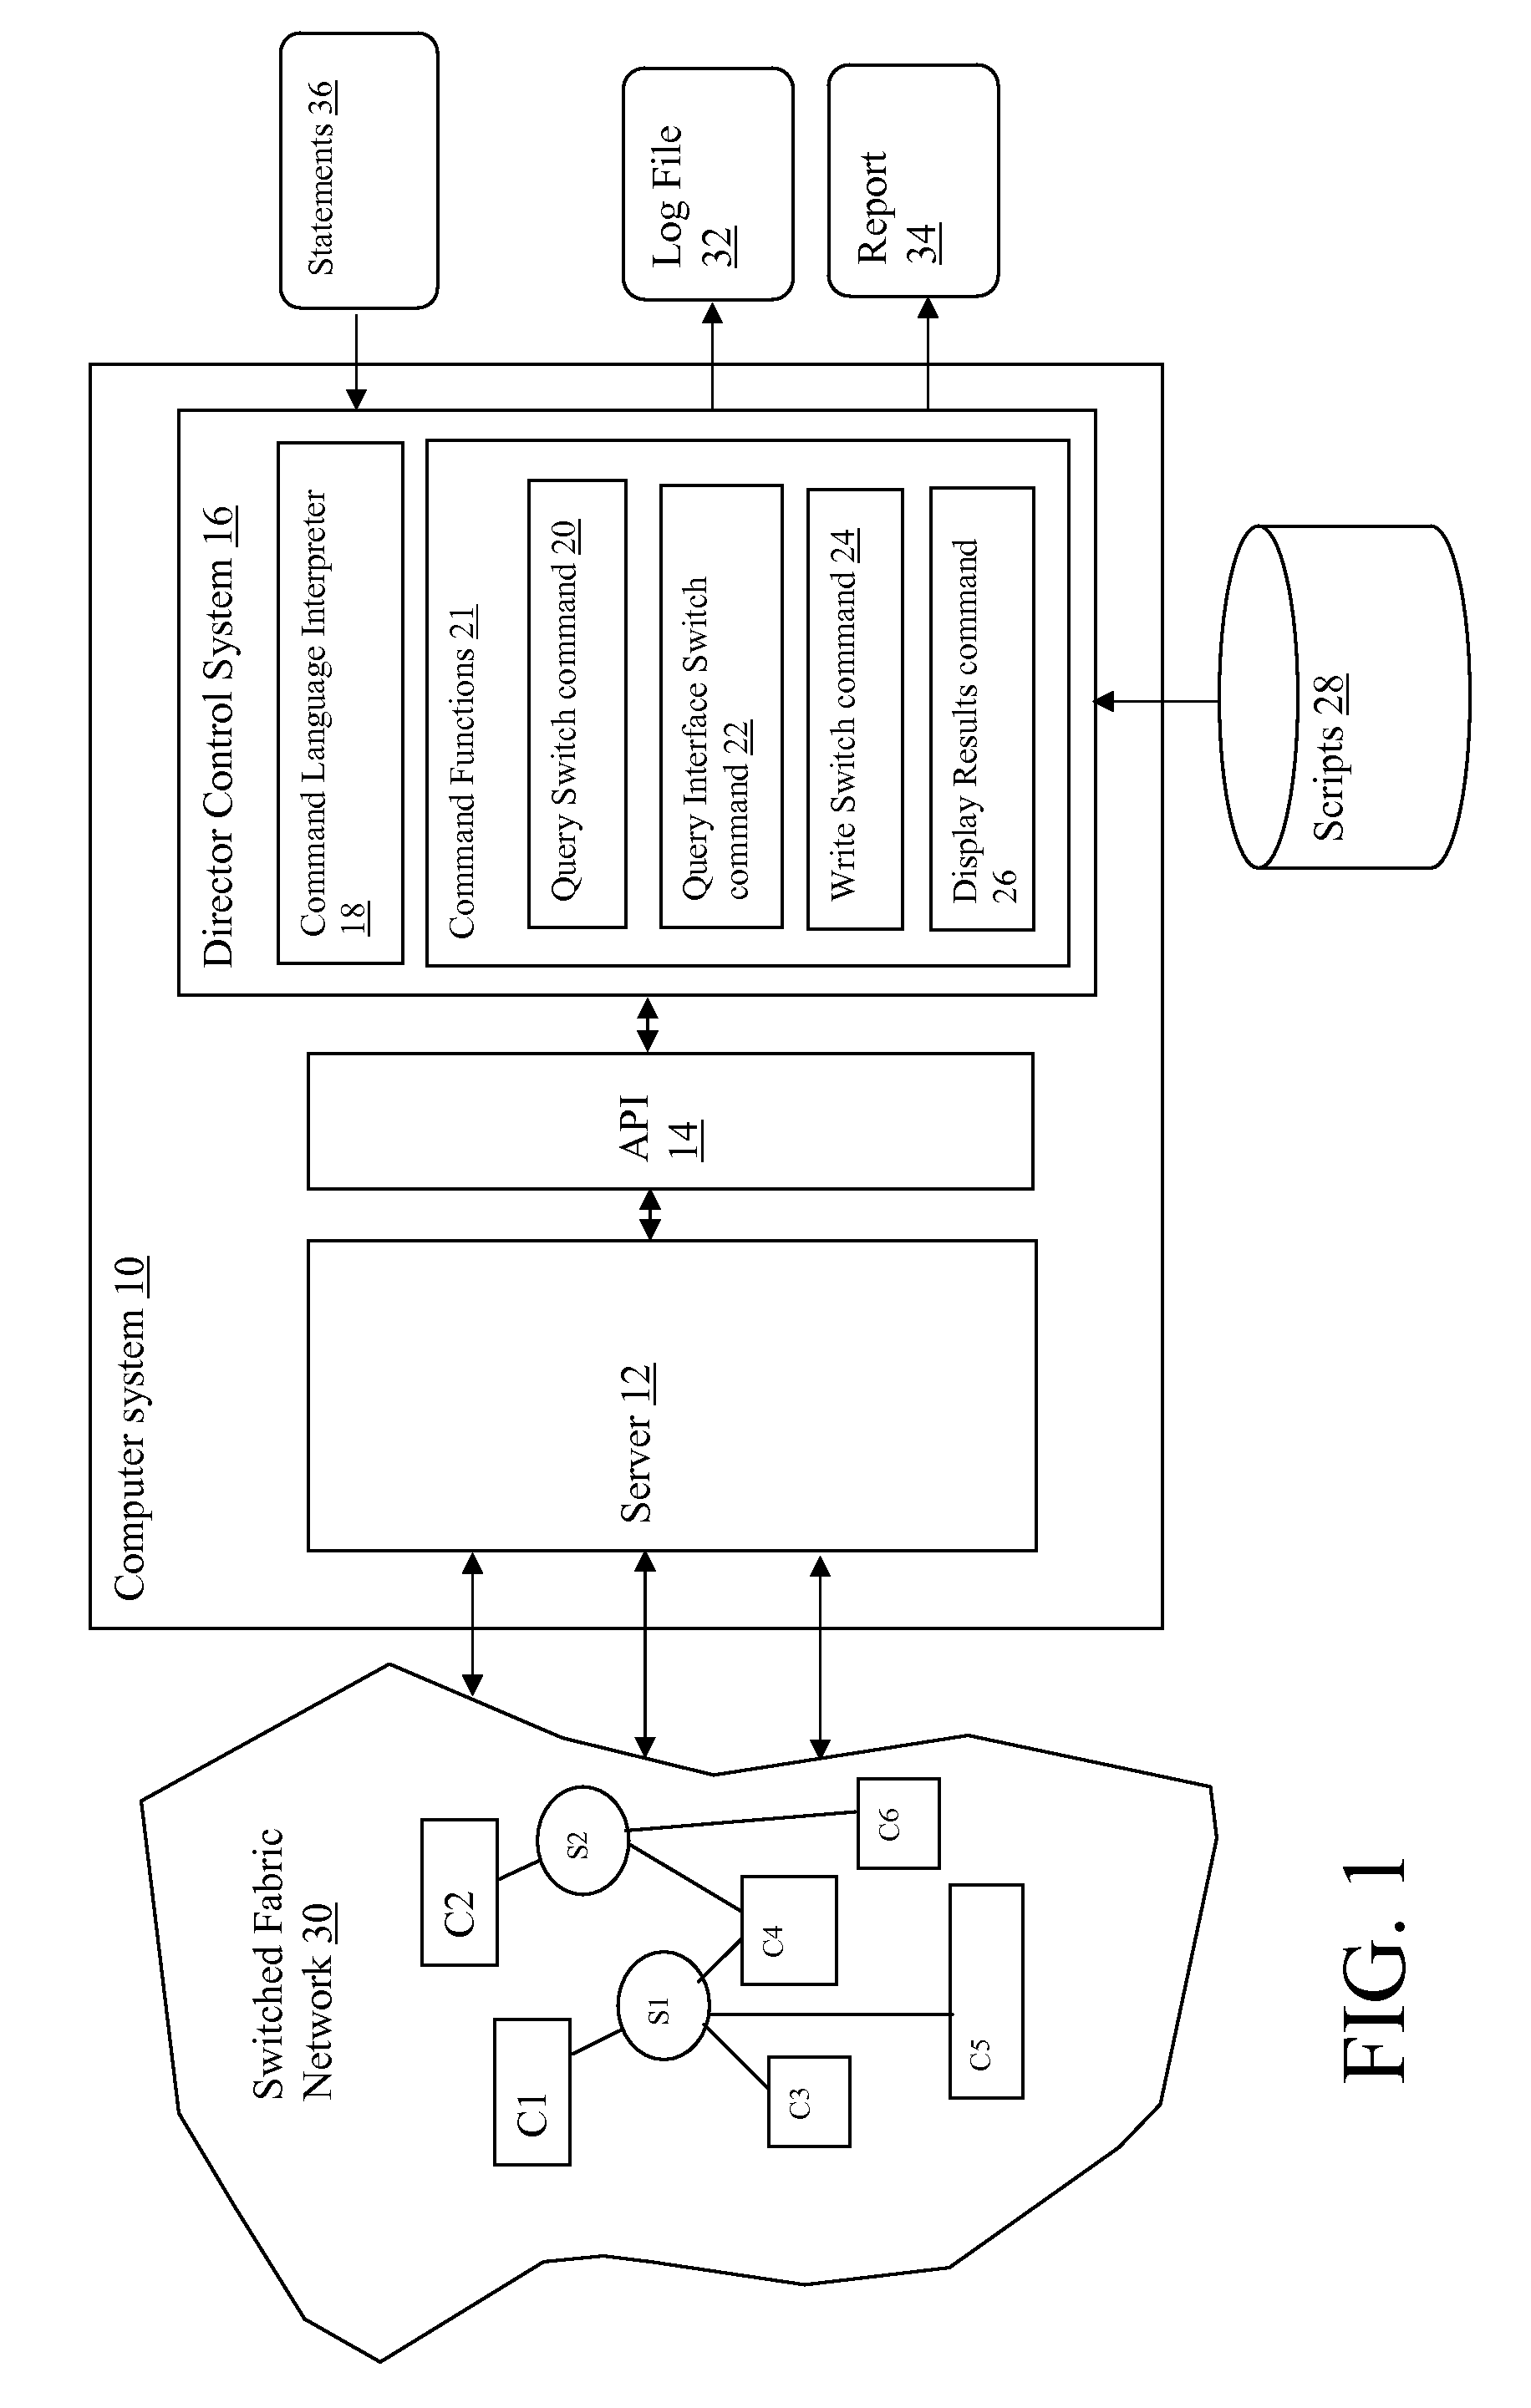 Automated validation of peripheral director hardware